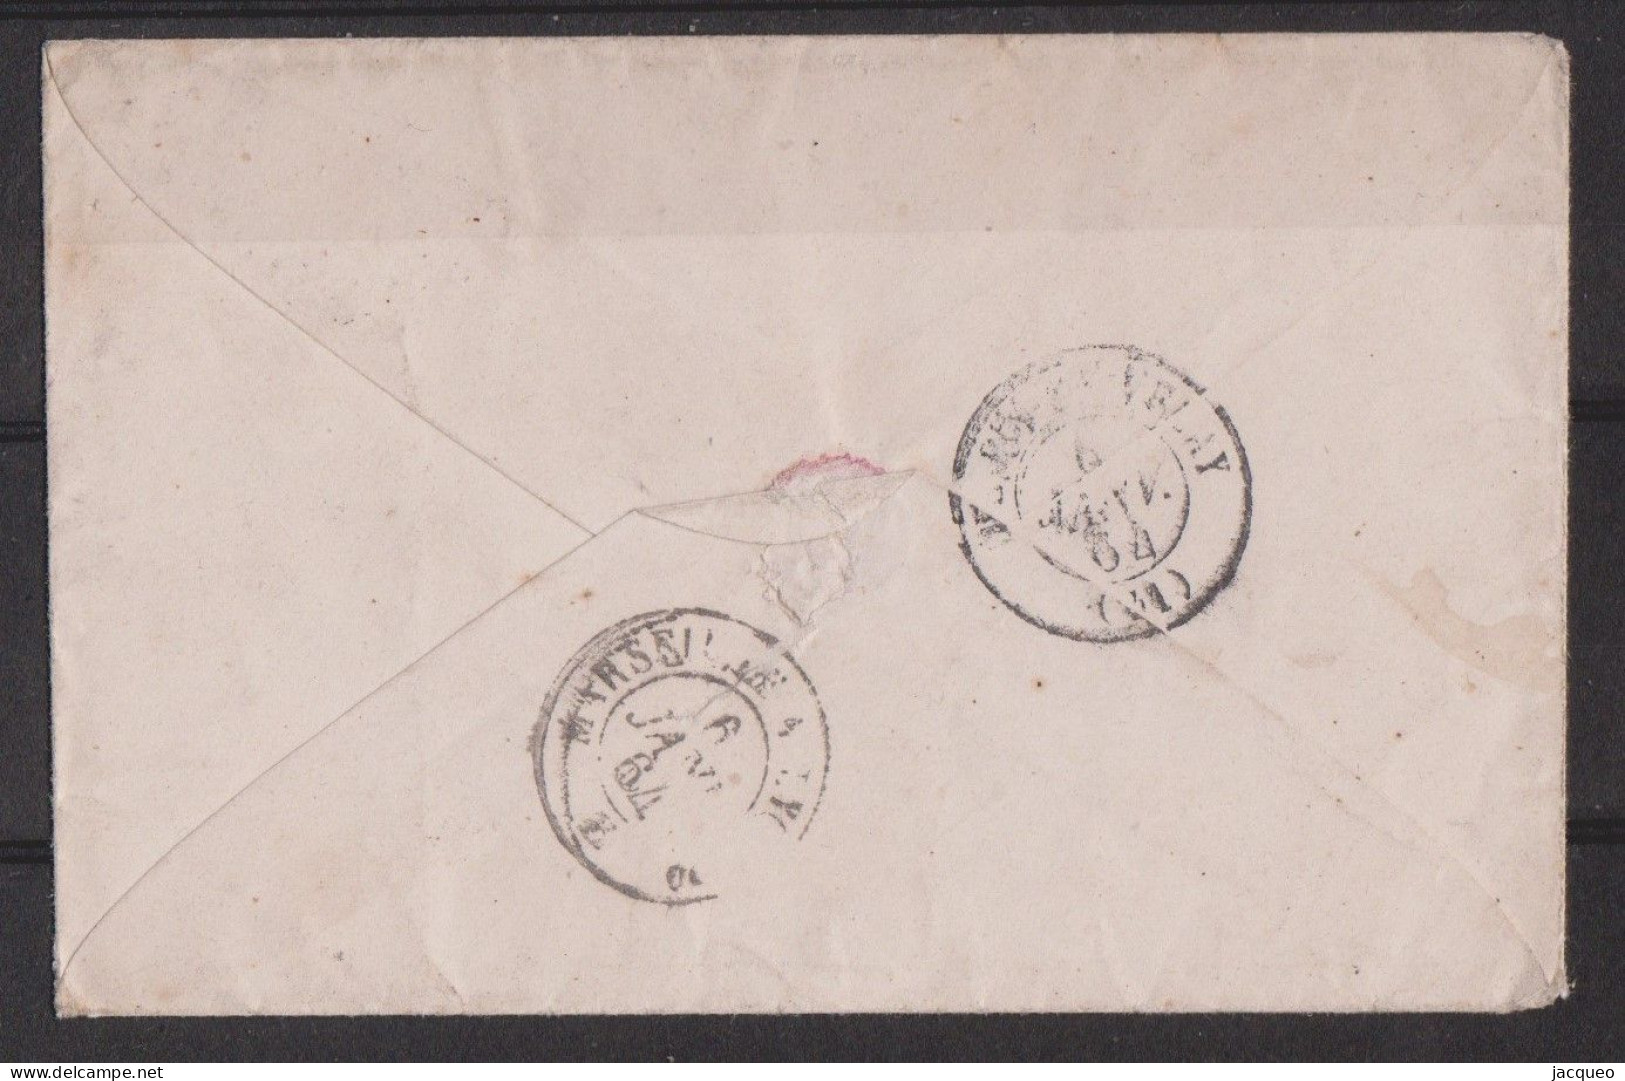 FRANCE N°13A - N°14 - N°14A -16A 1856-1860 NAPOLEON III  4 TIMBRES  + LETTRE N°14 ANNOHAY  VOIR SCAN - 1853-1860 Napoleon III